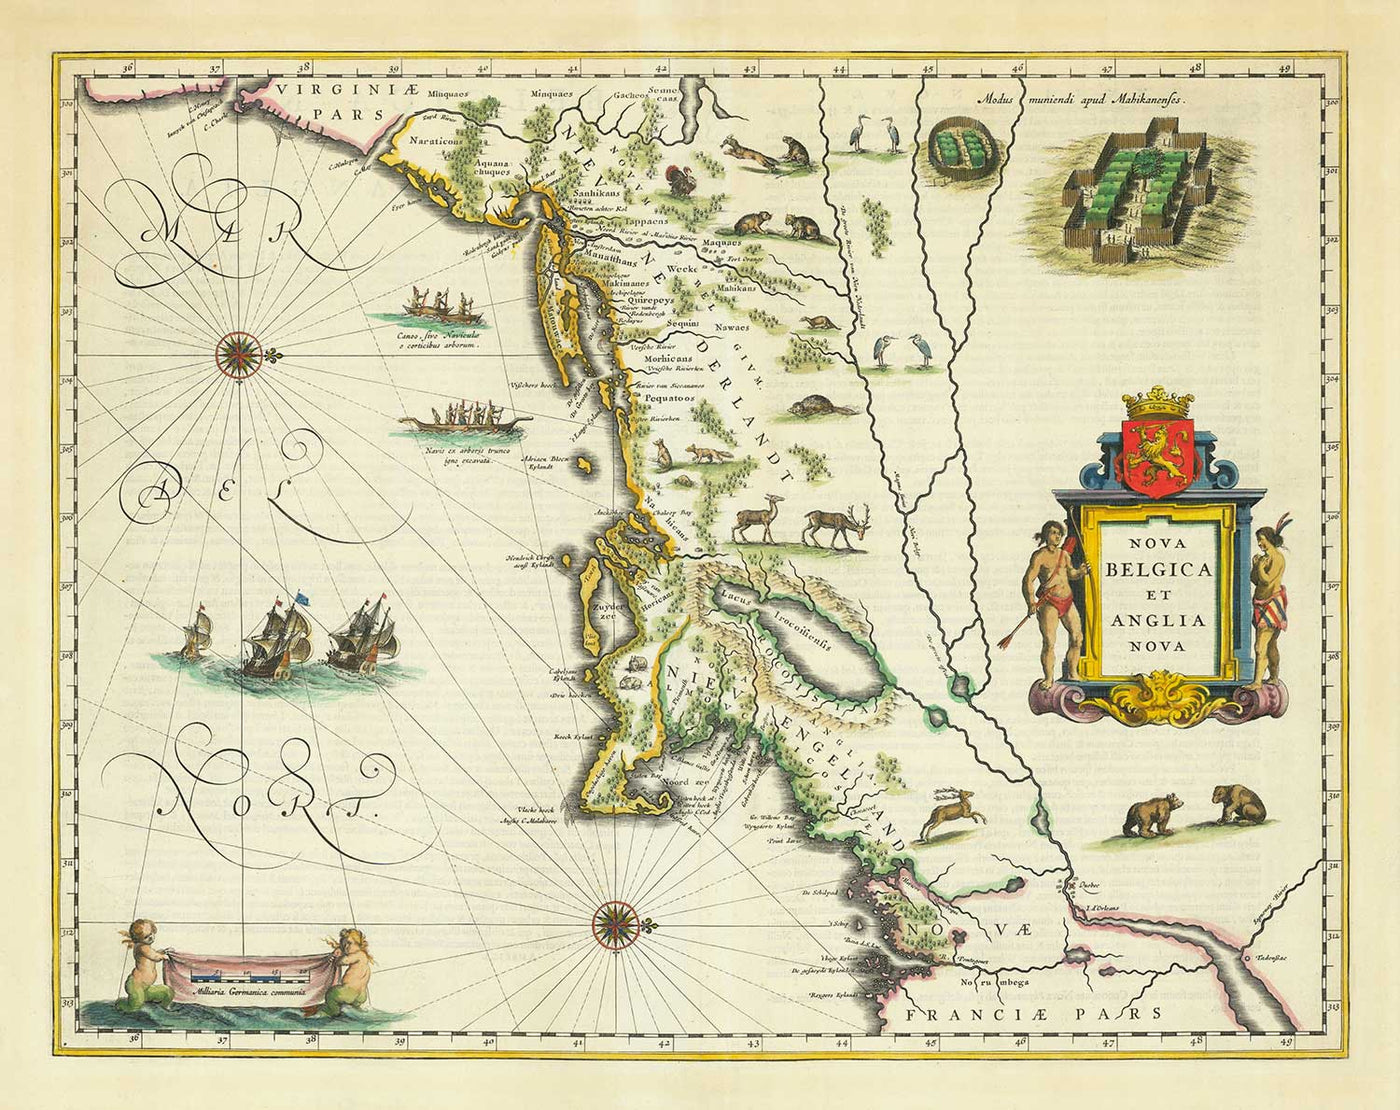 Old Map of New Netherlands and New England in 1640 by Willem Blaeu - Manhattan, Providence, New York, Boston, New Jersey